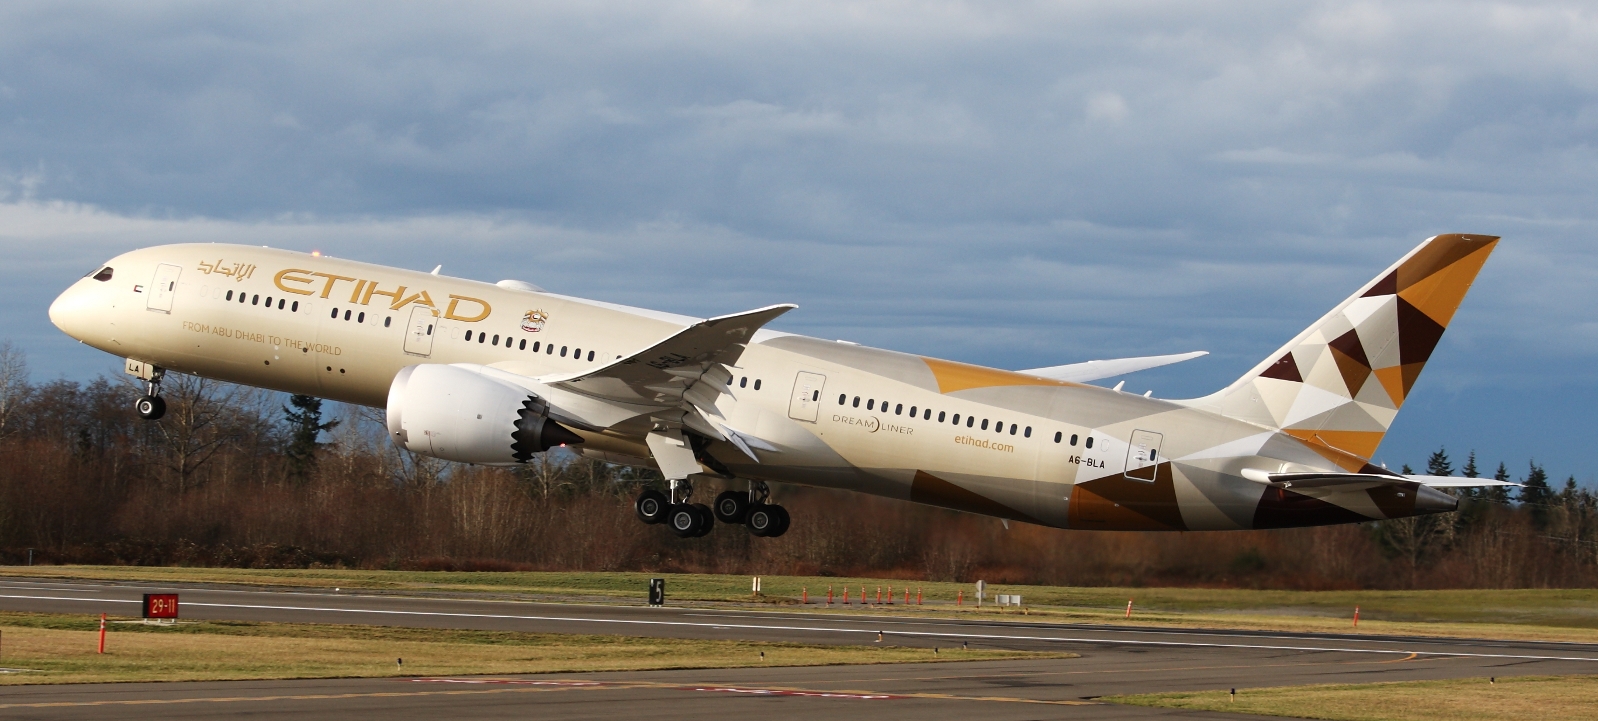 ETIHAD AIRWAYS TO INCREASE DALLAS/FORT WORTH SERVICE WITH DAILY FLIGHTS BEGINNING FEBRUARY 2017